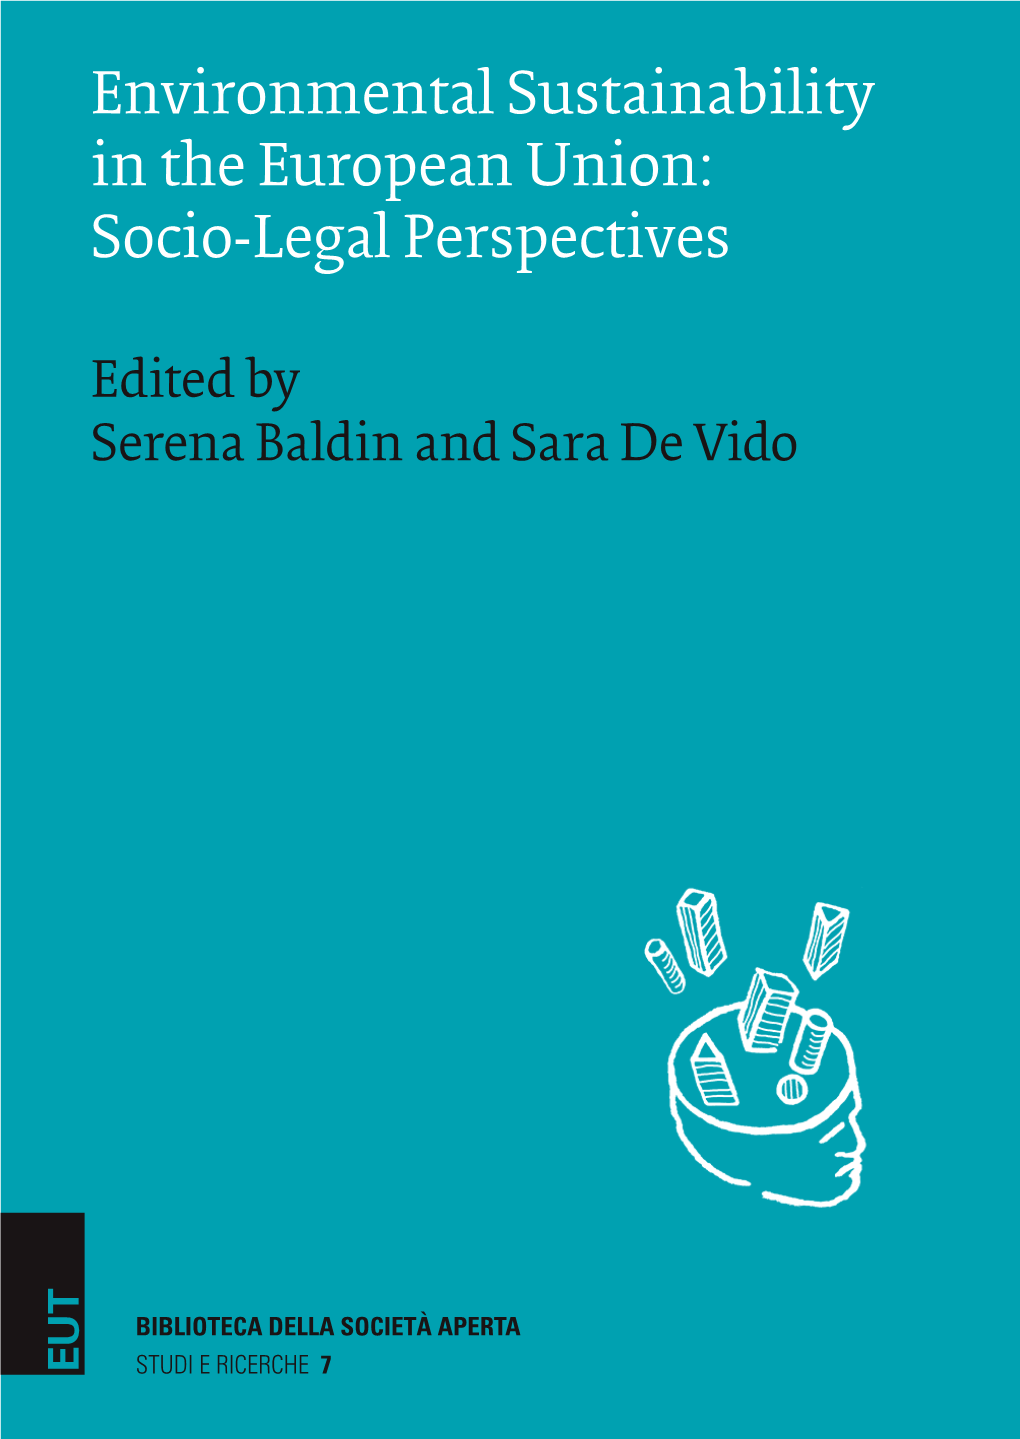 Environmental Sustainability in the European Union: Socio-Legal Perspectives Edited by S